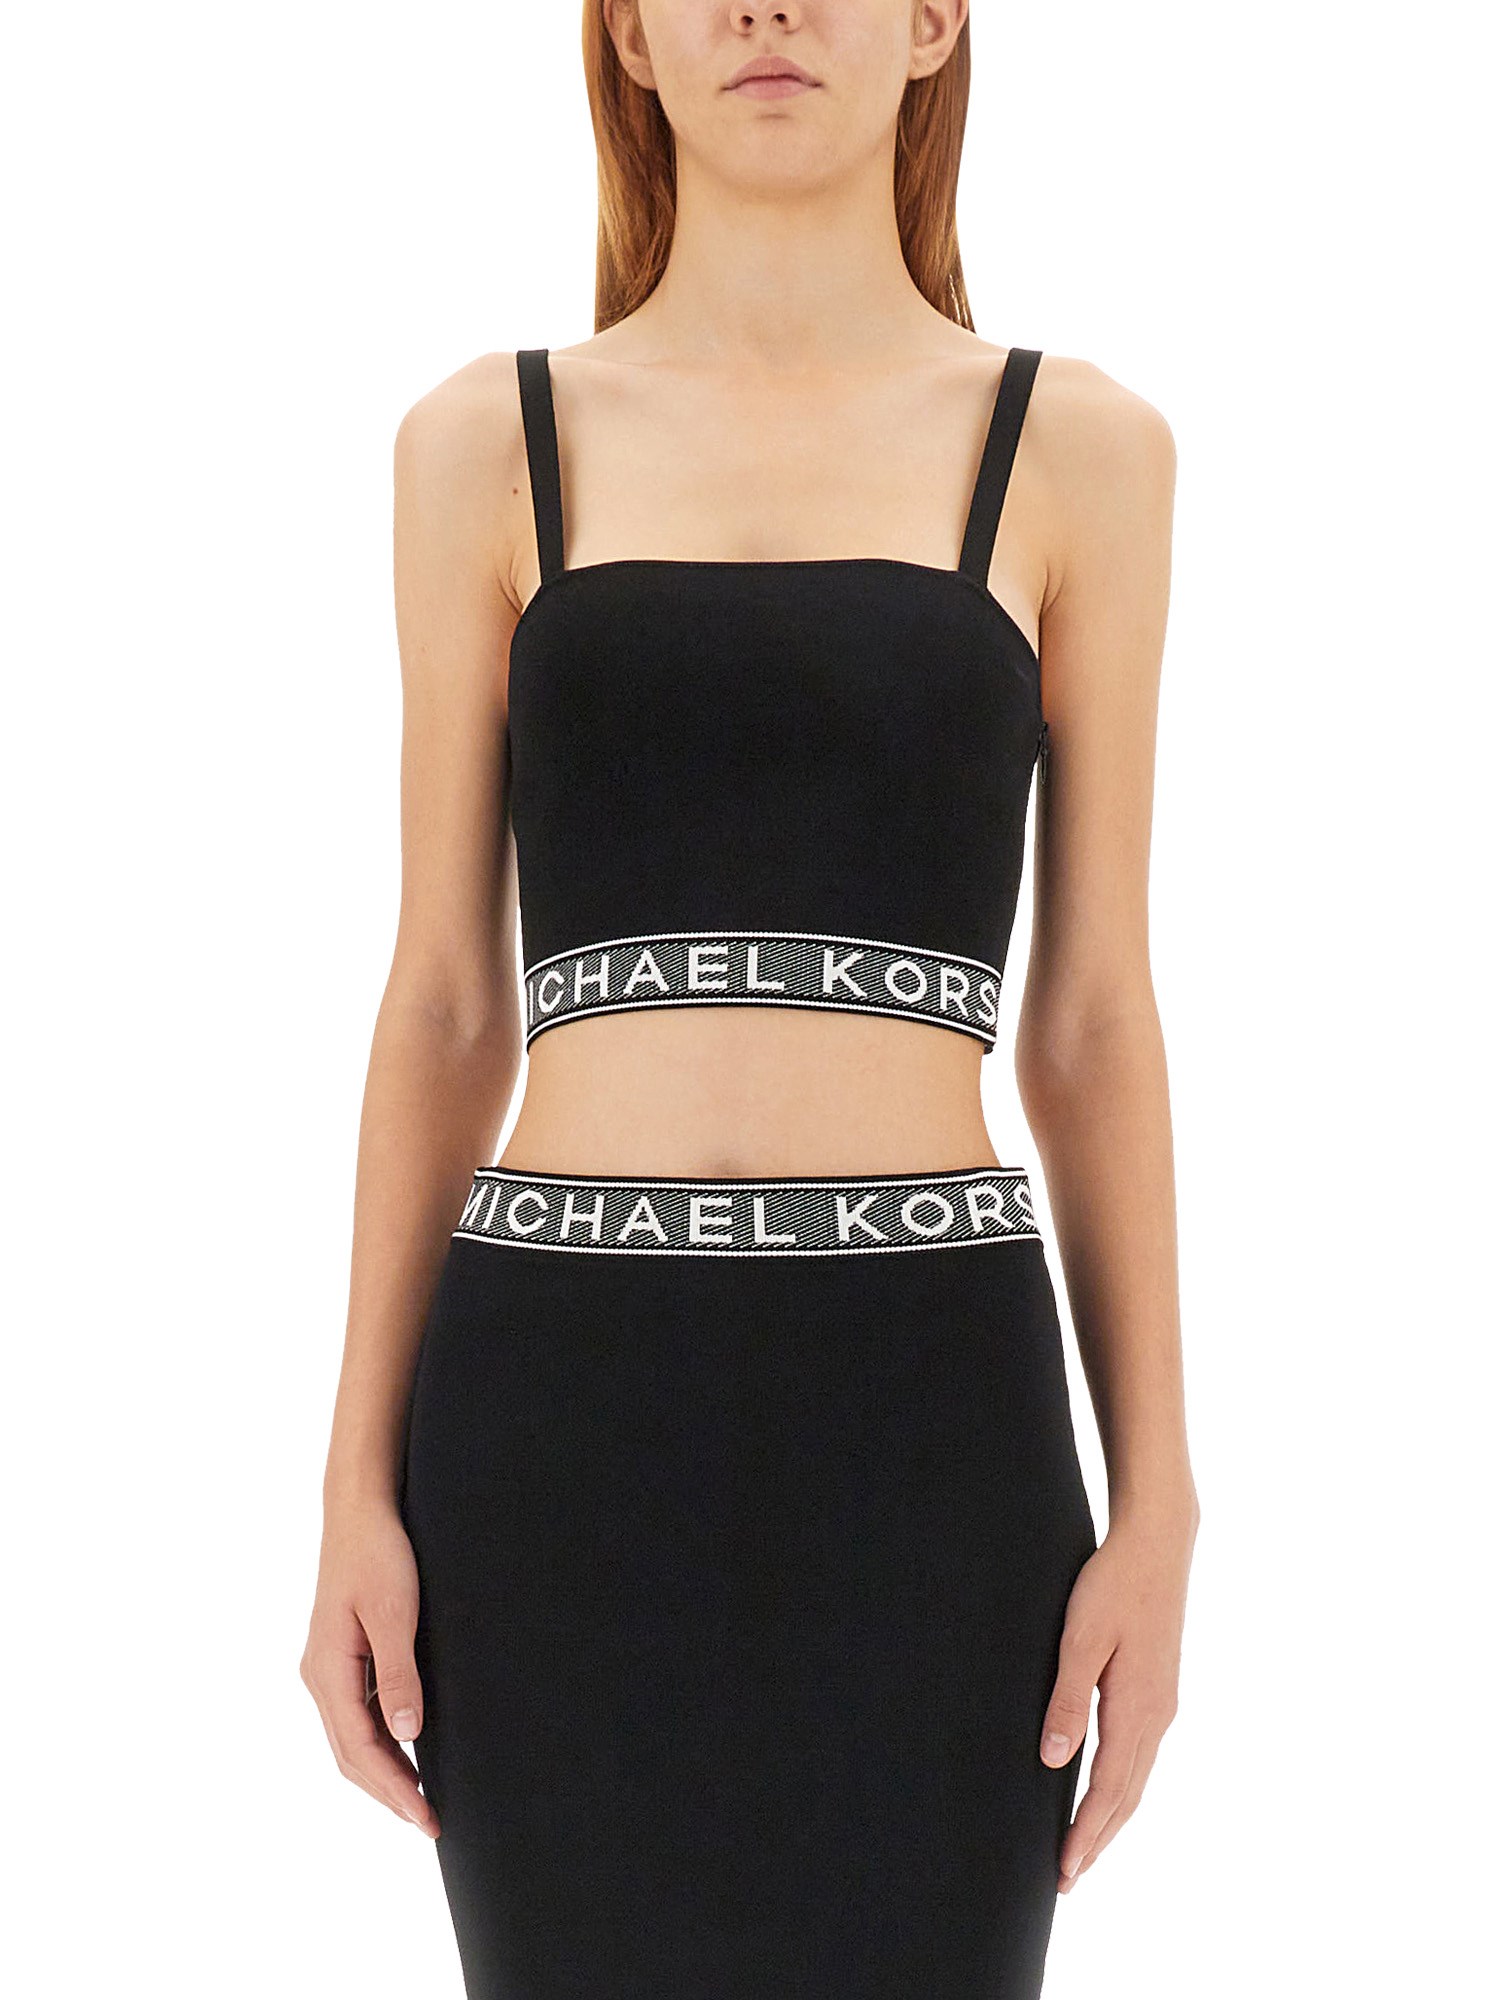 michael by michael kors tops with logo